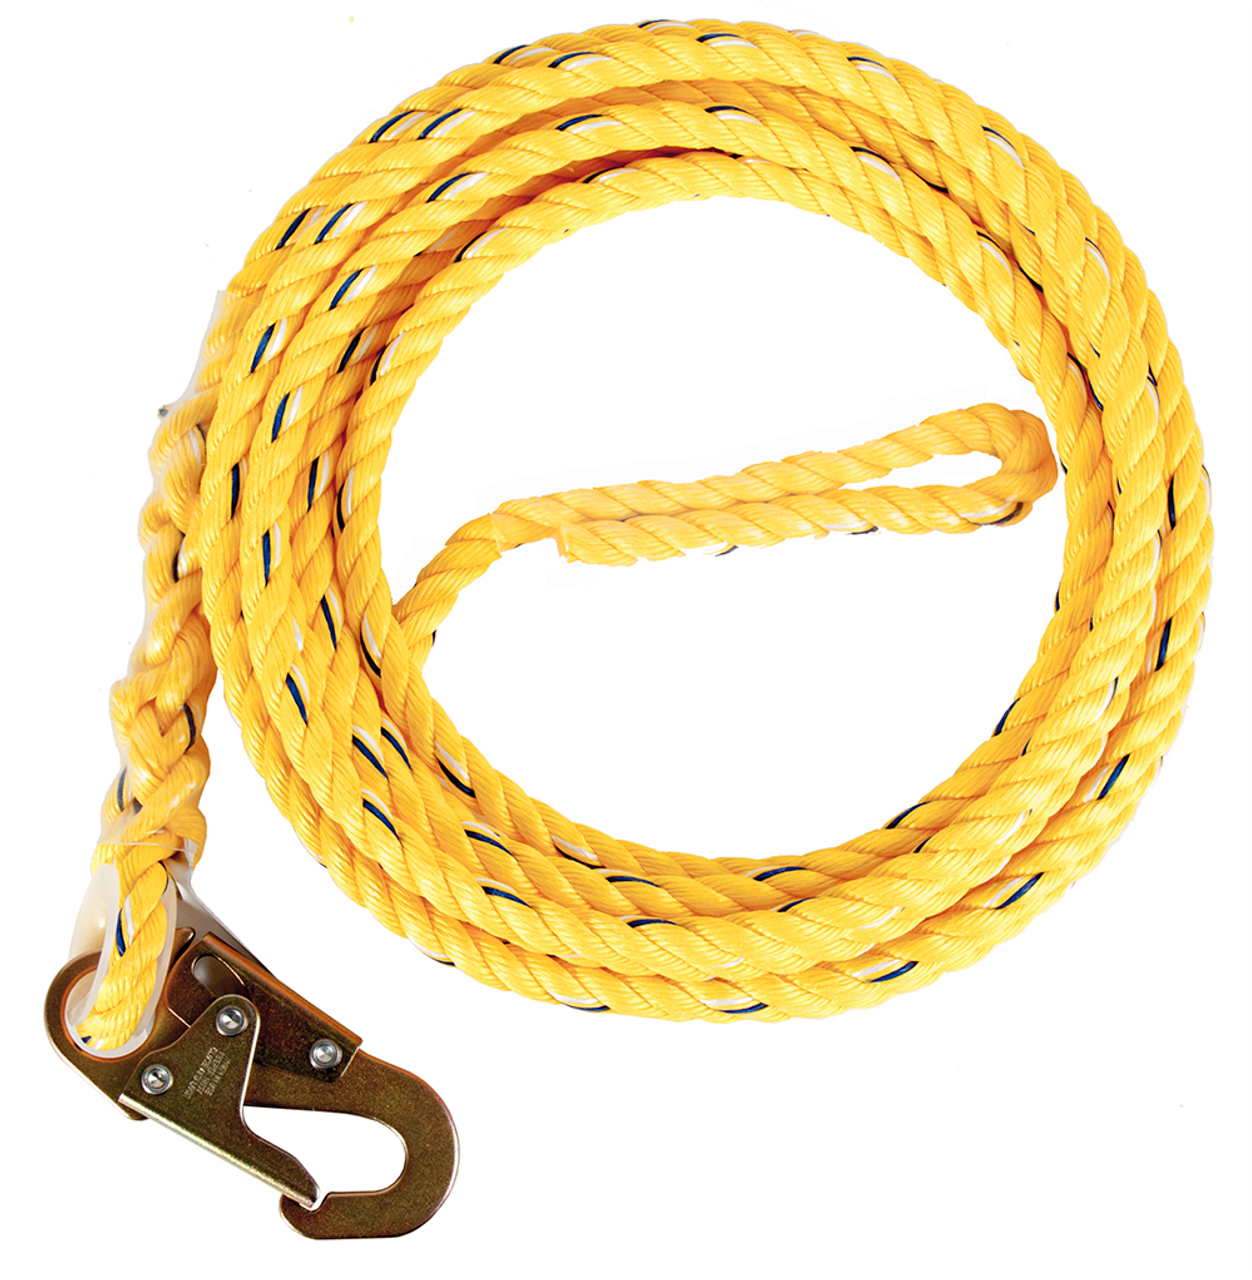 Guardian 01330 Poly steel Rope with Snap Hook End 25' - Industrial